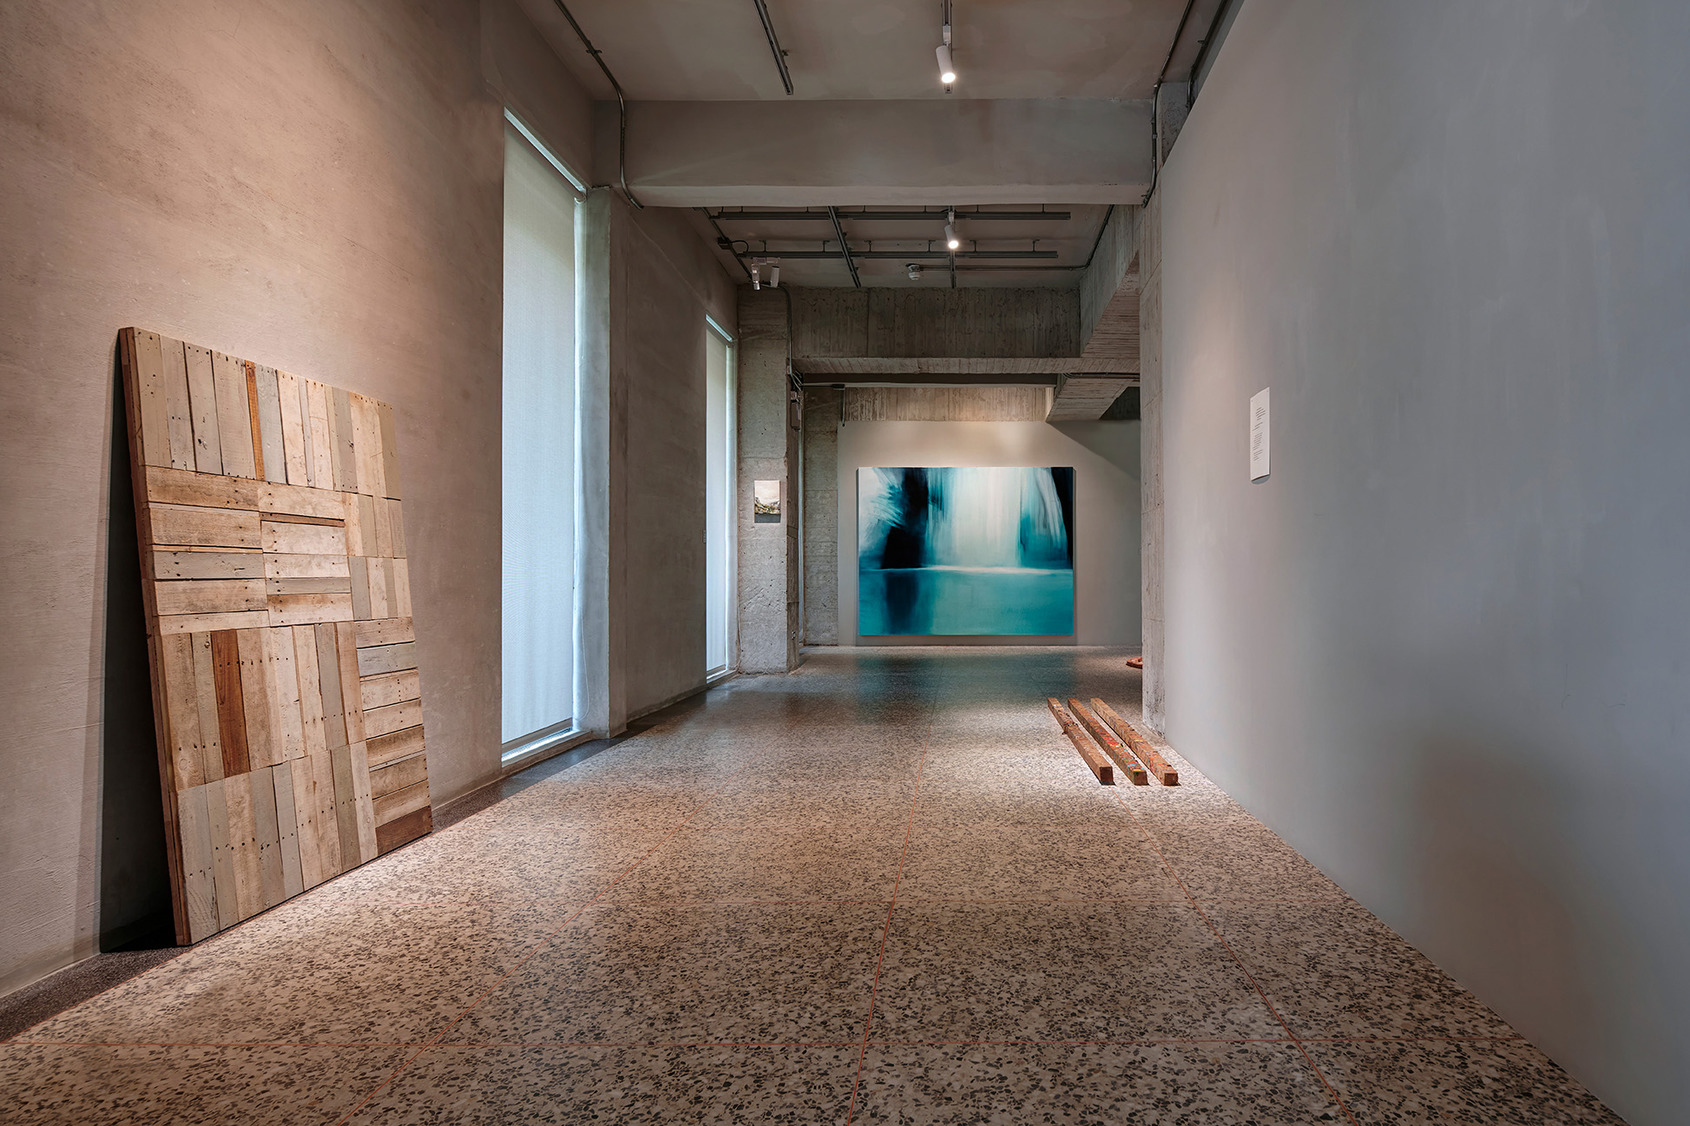 The installation view of Yaman Shao's Exquisite Incompleteness (left front), The Depth of Attains (right front), The Room of Escape (left back), and Firenze (right back) at ALIEN Art Centre © ALIEN Art Centre 